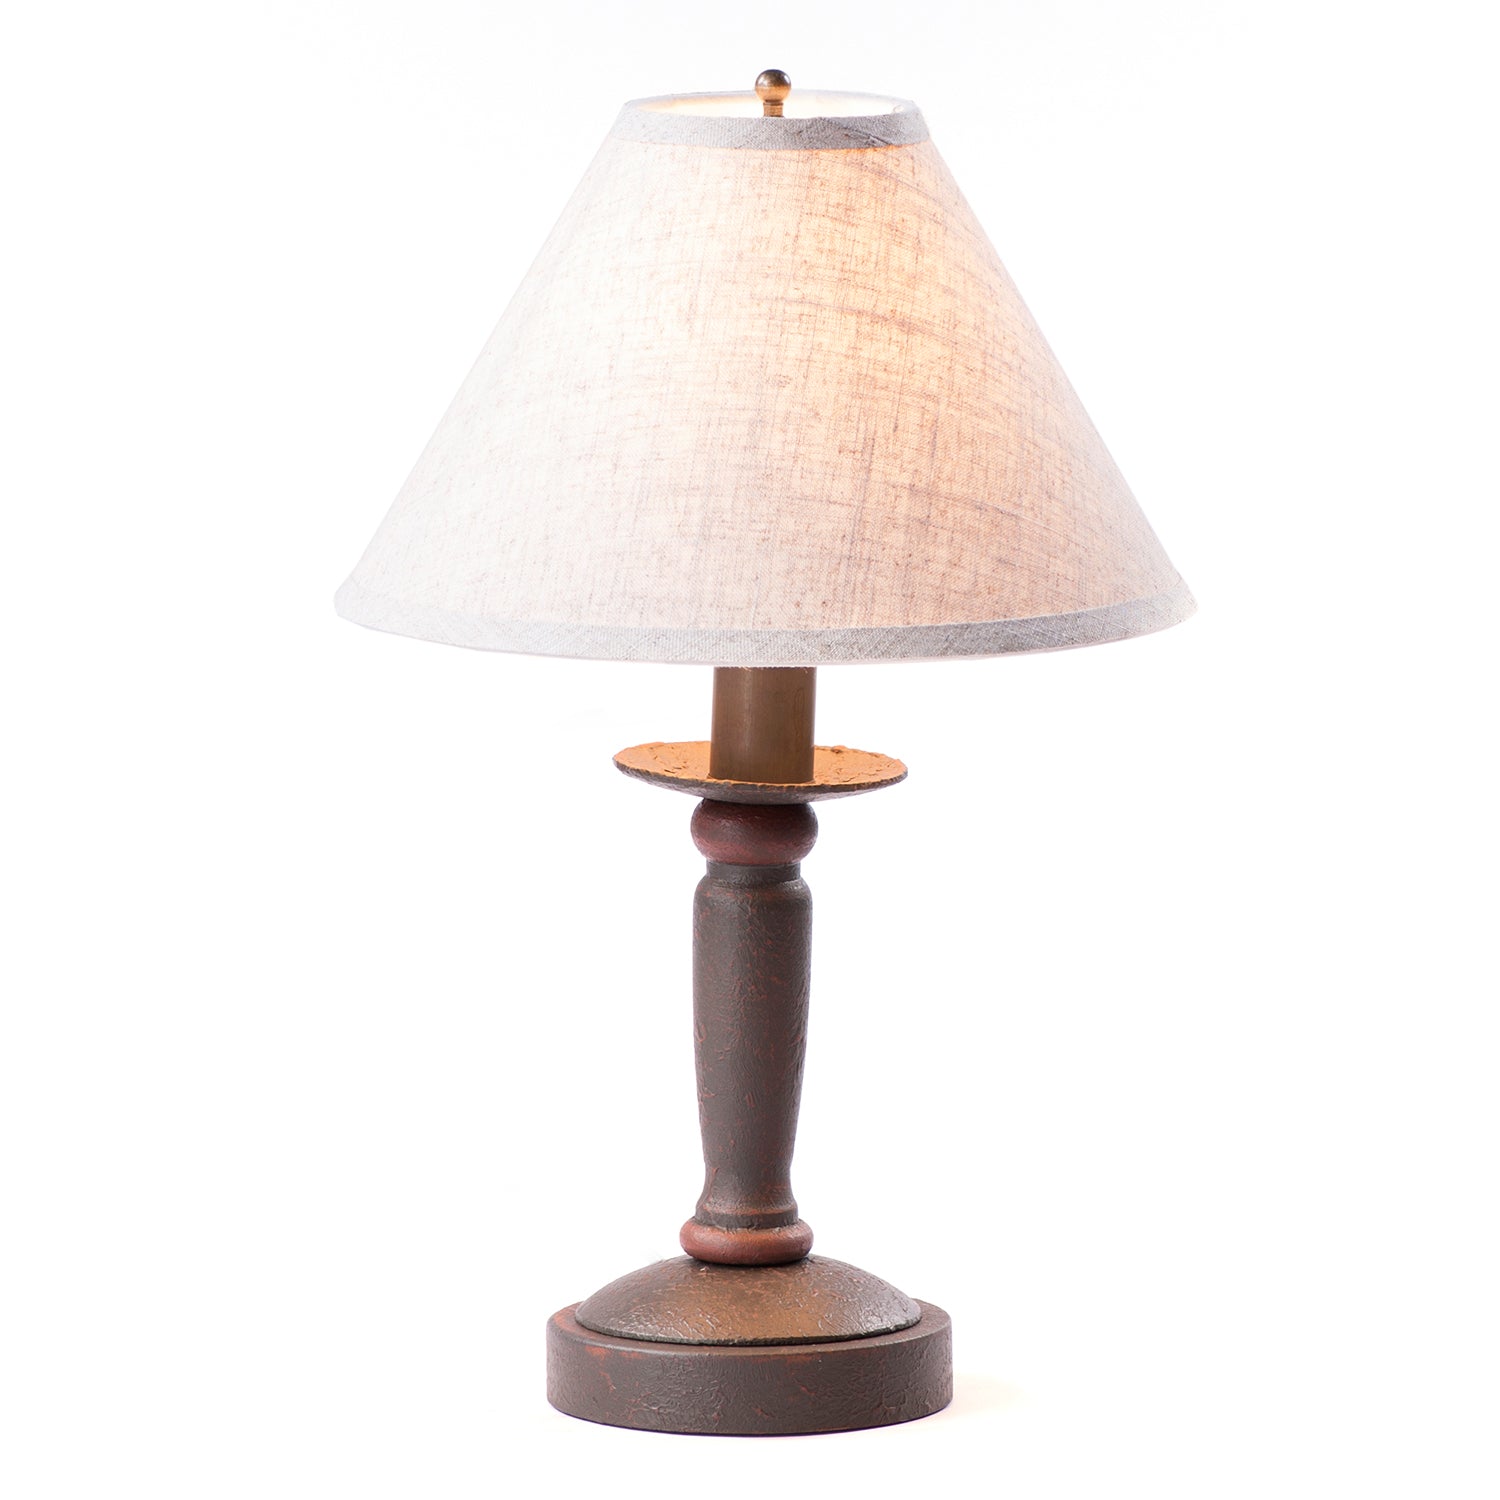 Butcher Lamp in Americana Espresso with Linen Ivory Shade